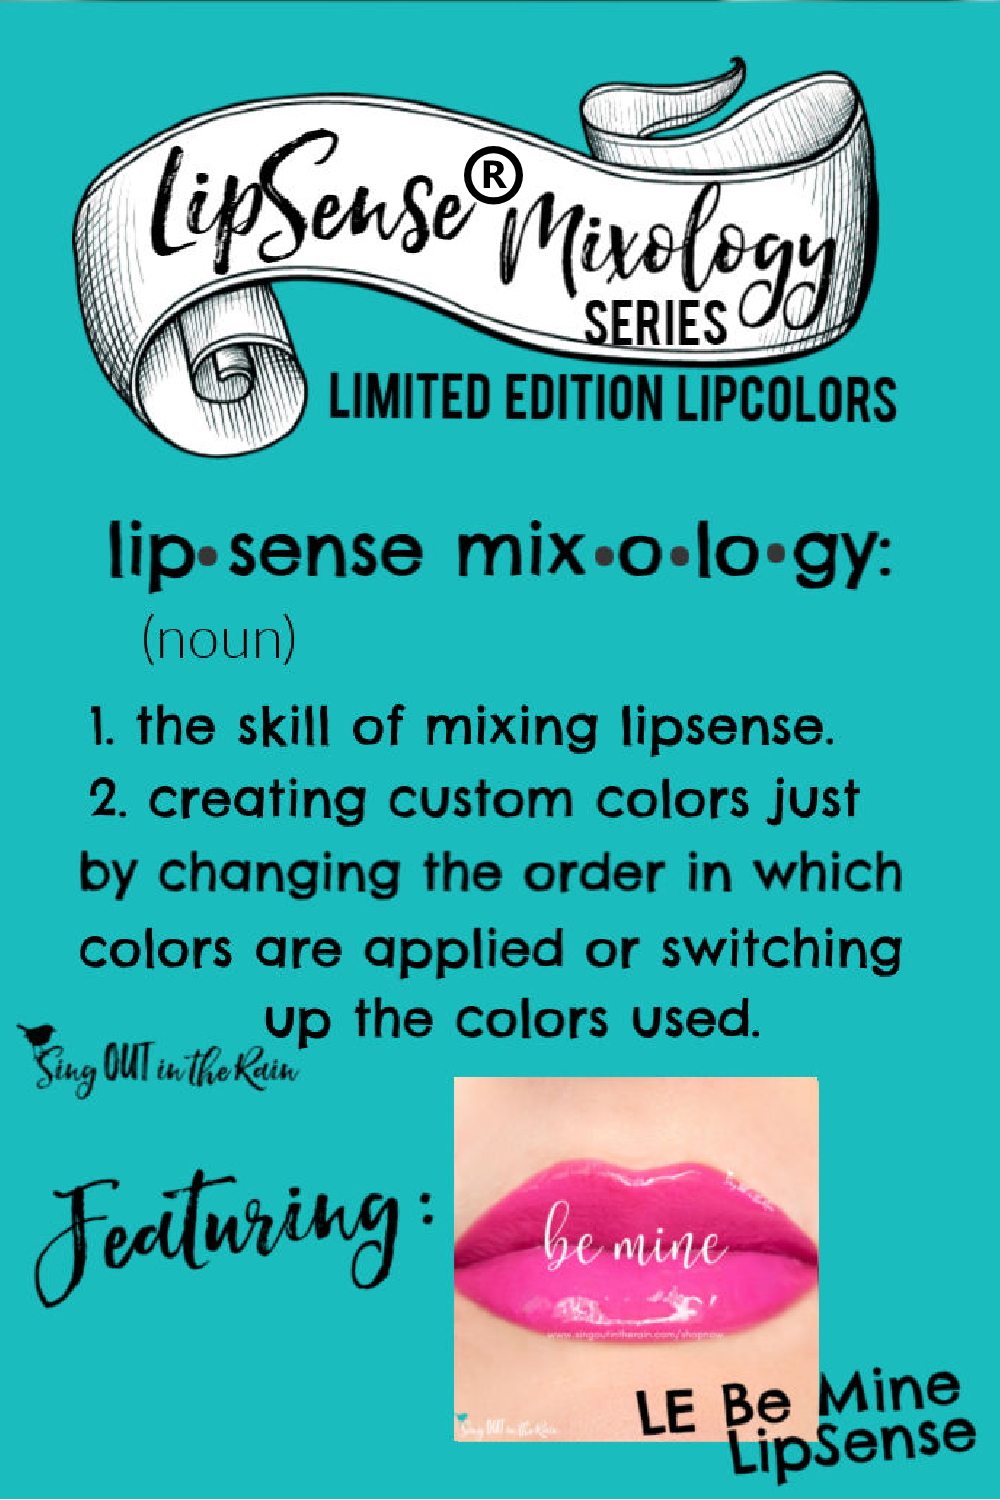 The Ultimate Guide to Be Mine LipSense Mixology